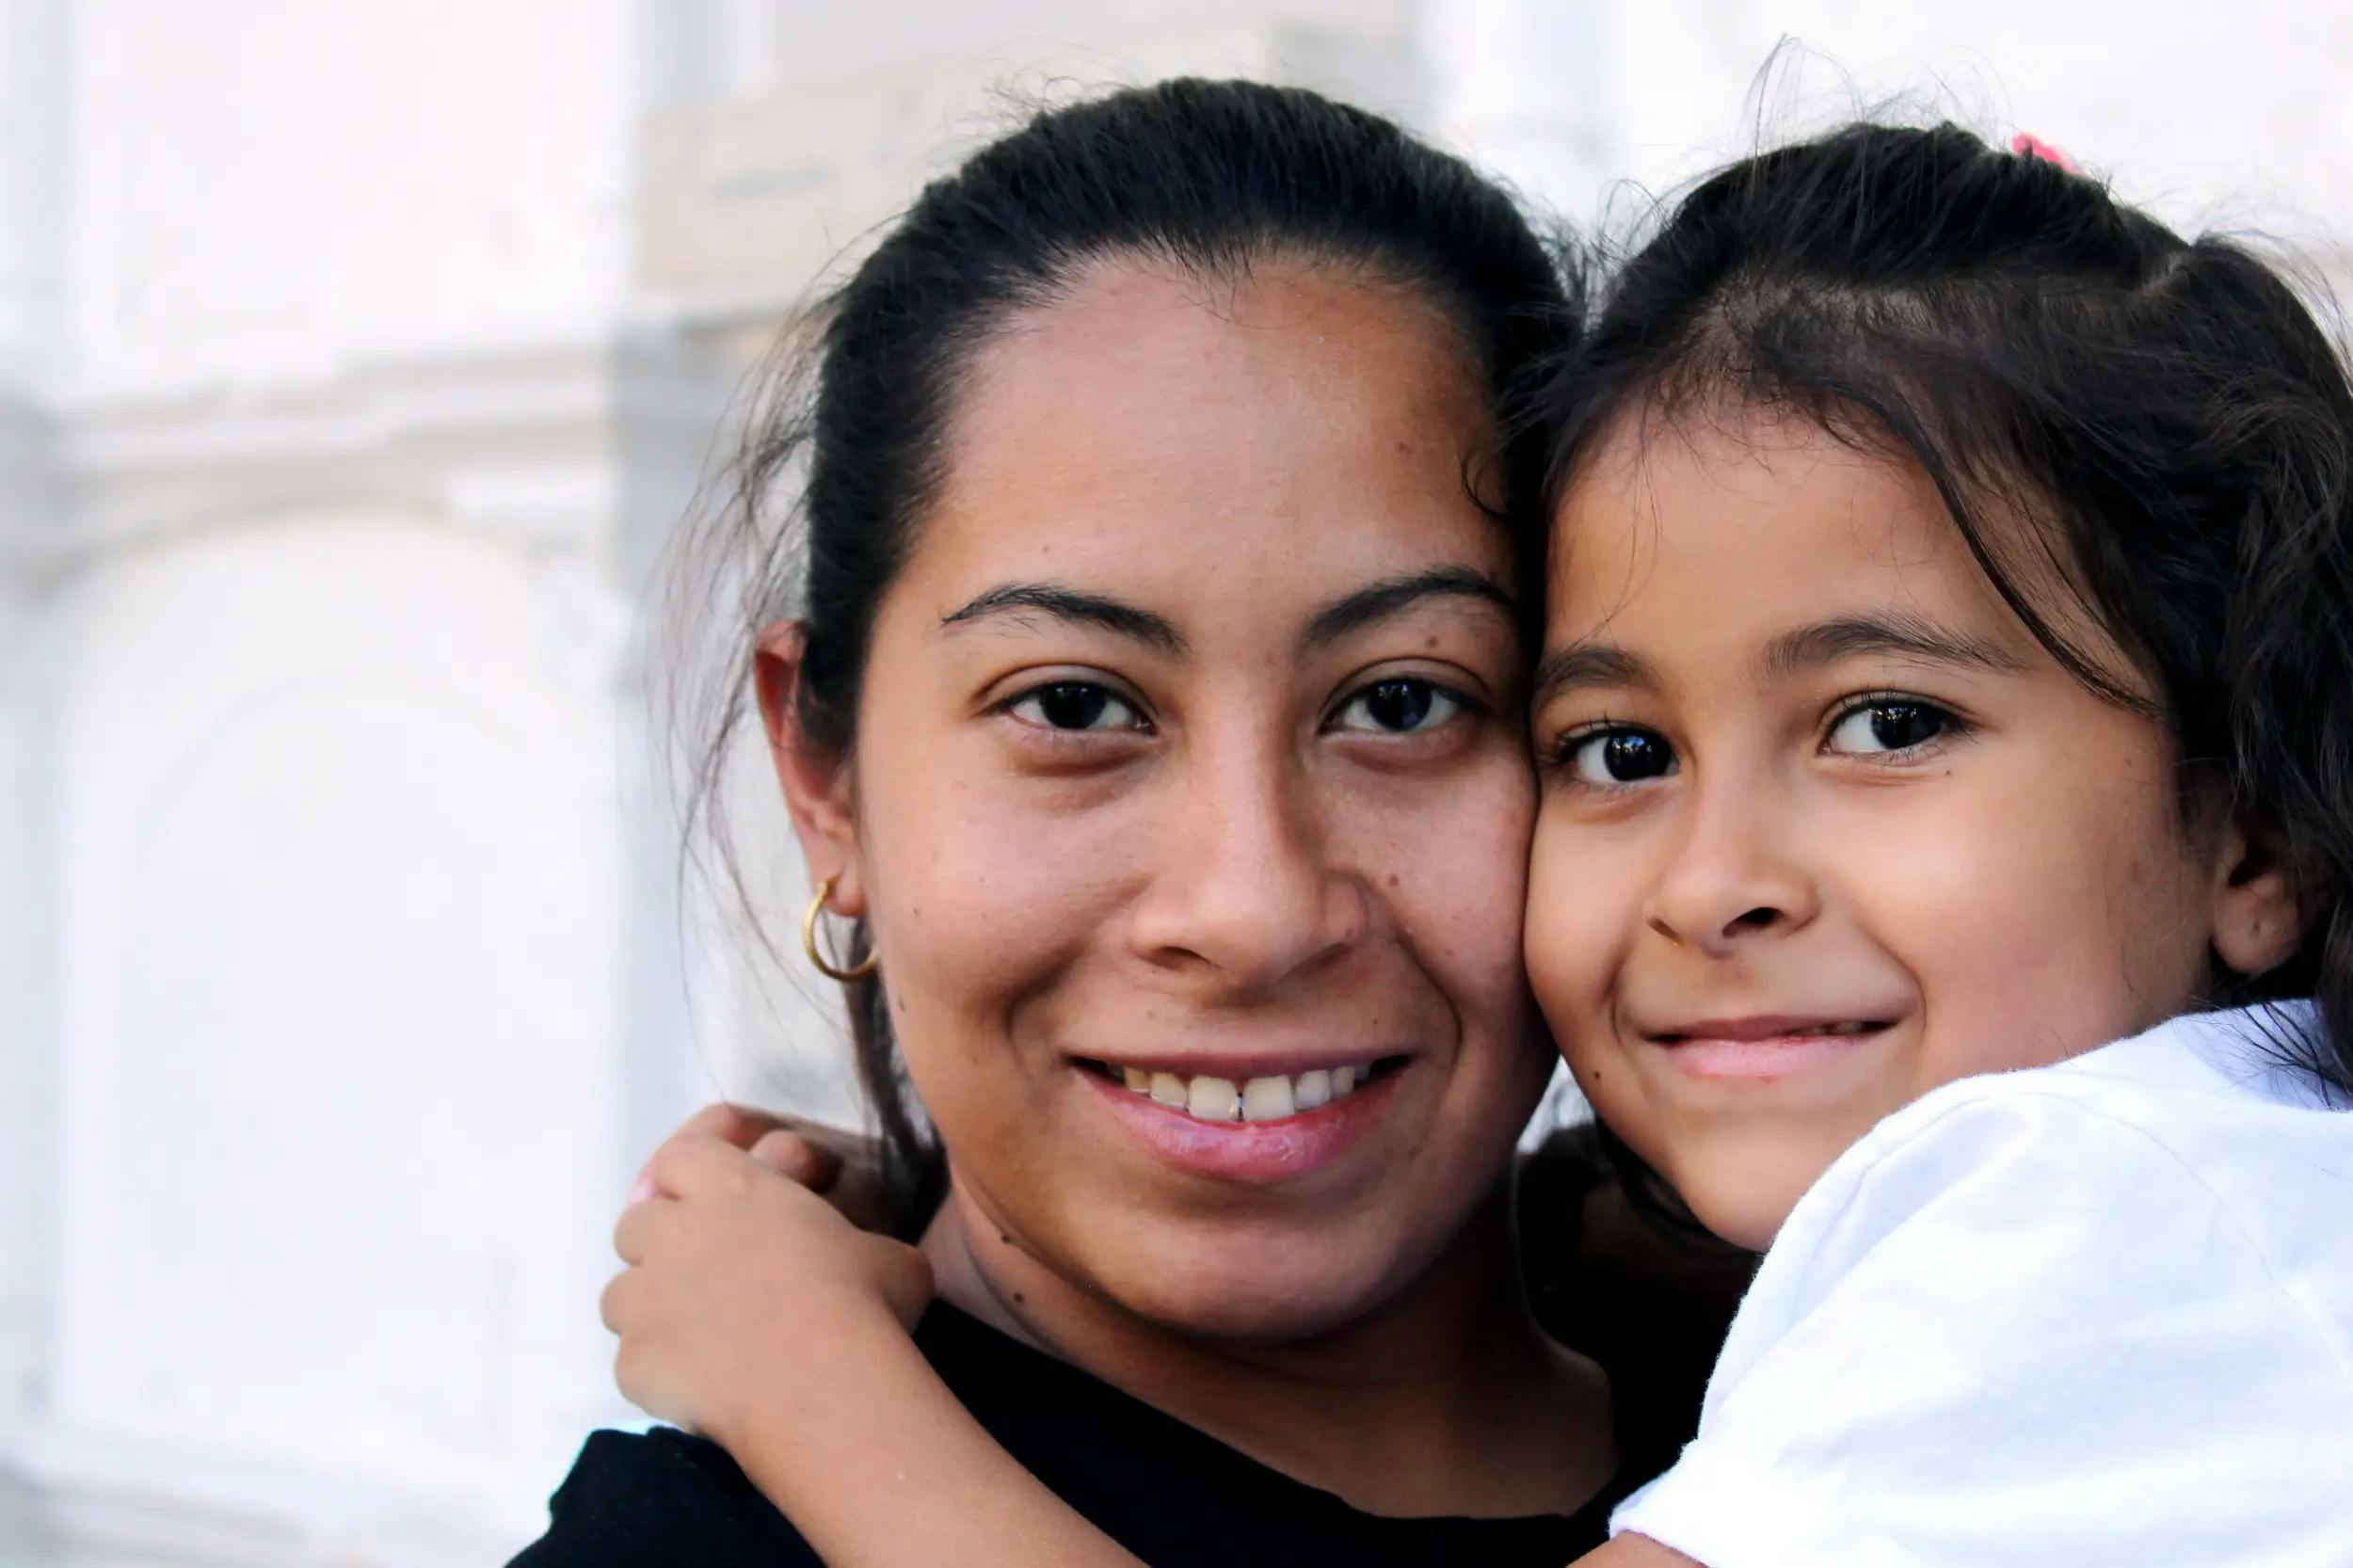 Immigrant mother and daughter smiling